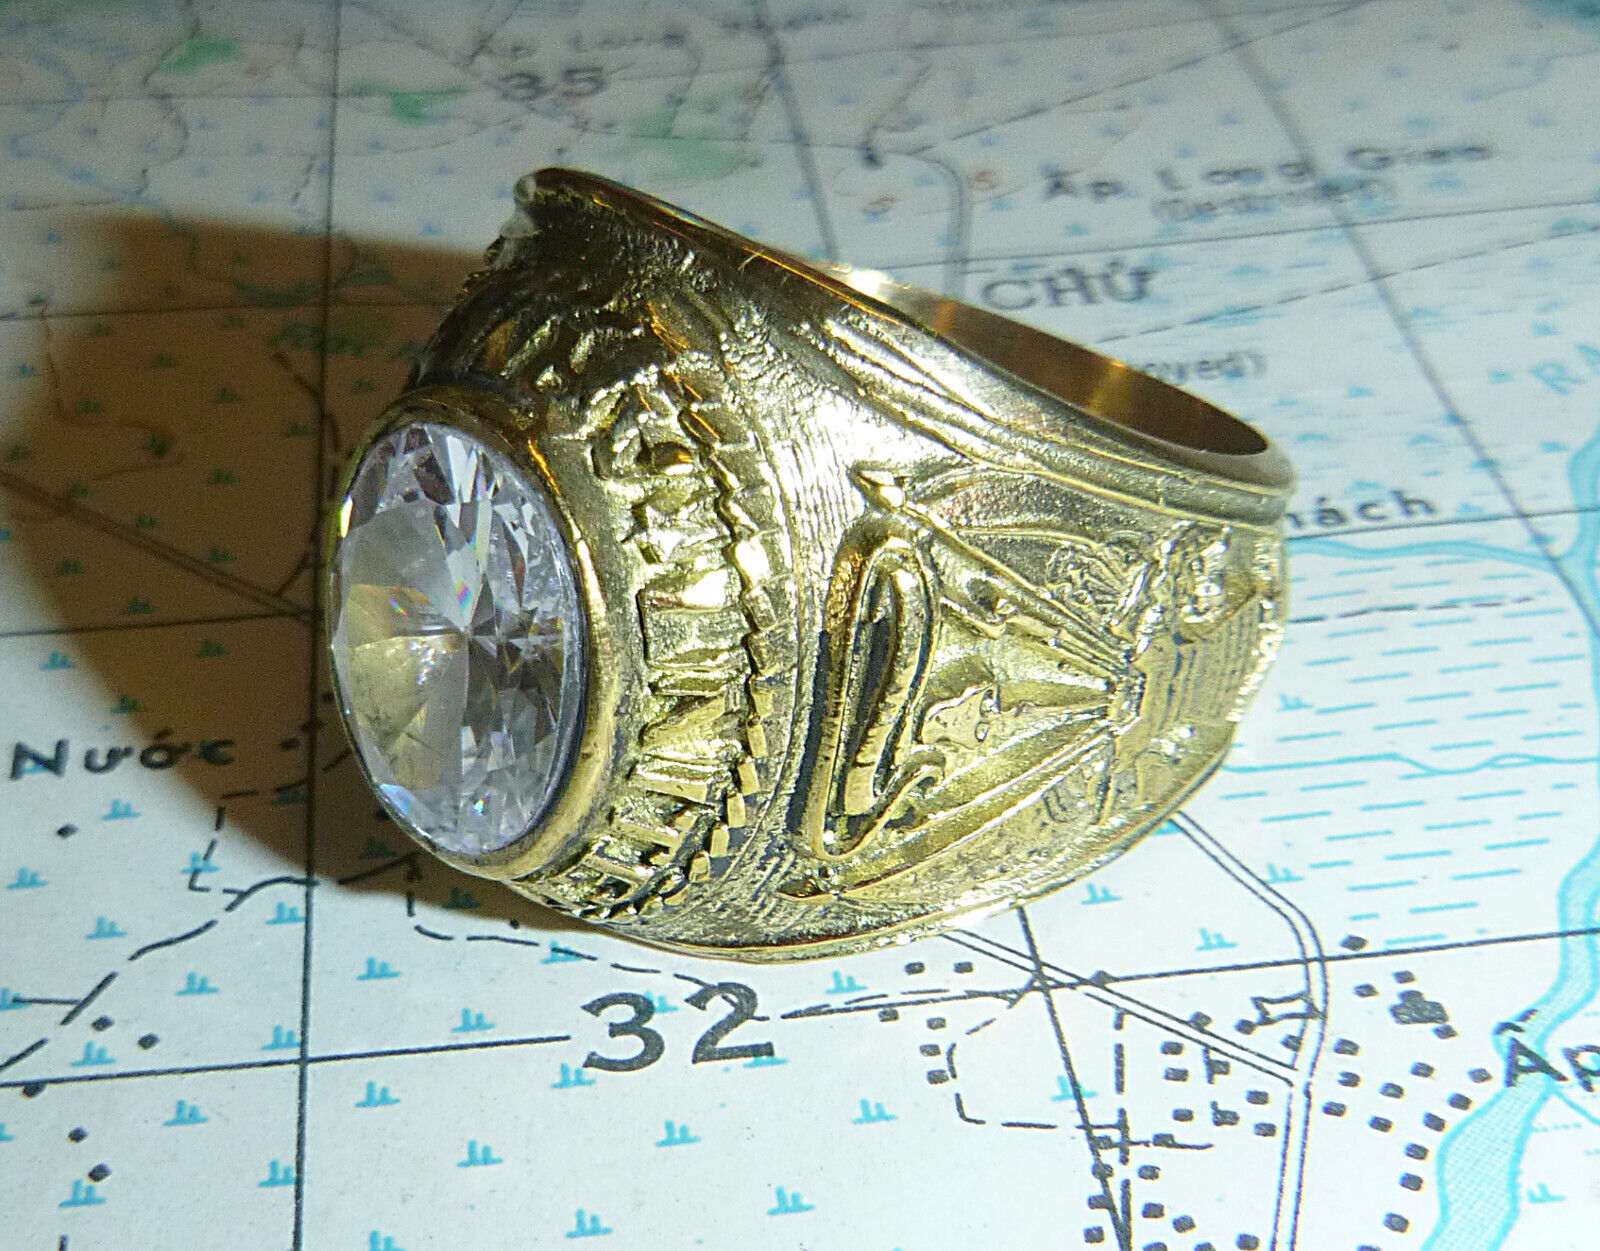 United States Army - MENS RING - SIZE 10.5 - LARGE - White - Vietnam War - R.55